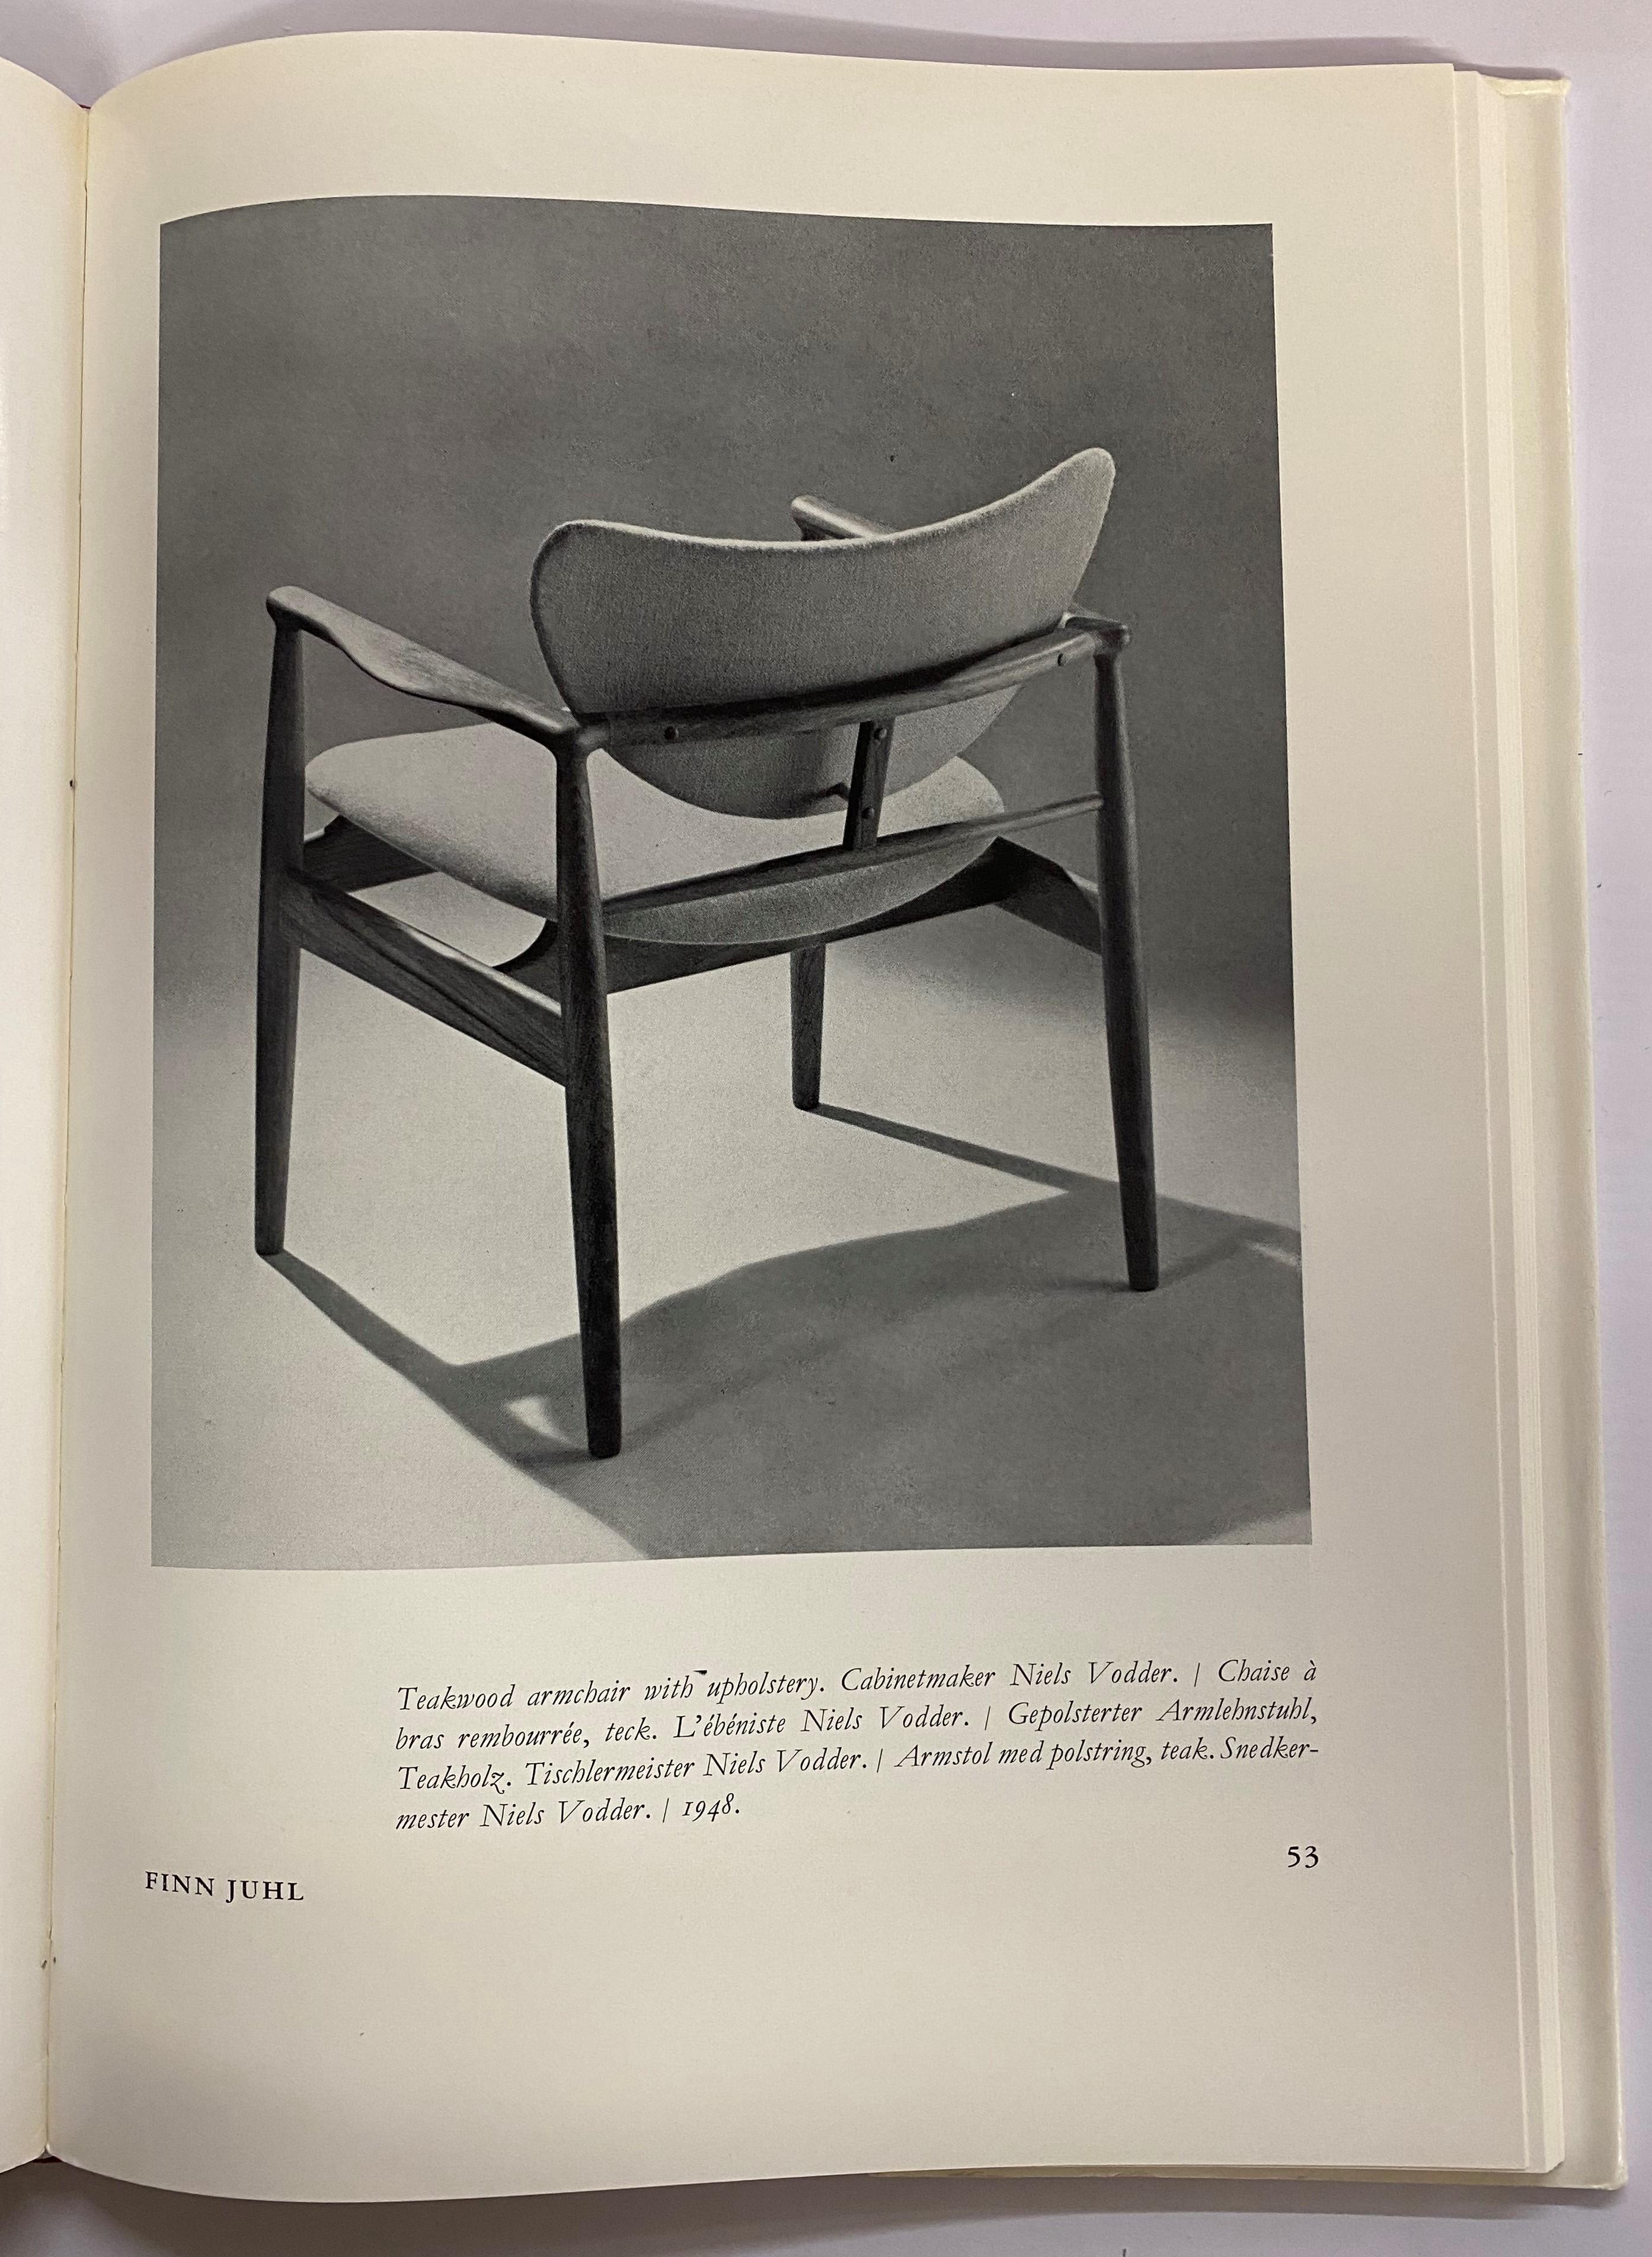 Modern Danish Furniture is the third volume of a series of books on modern Danish applied art. This volume, like the earlier ones, is edited by the Danish architect Esbjorn Hiort, M.A.A., who has written the introduction. While Danish silver and